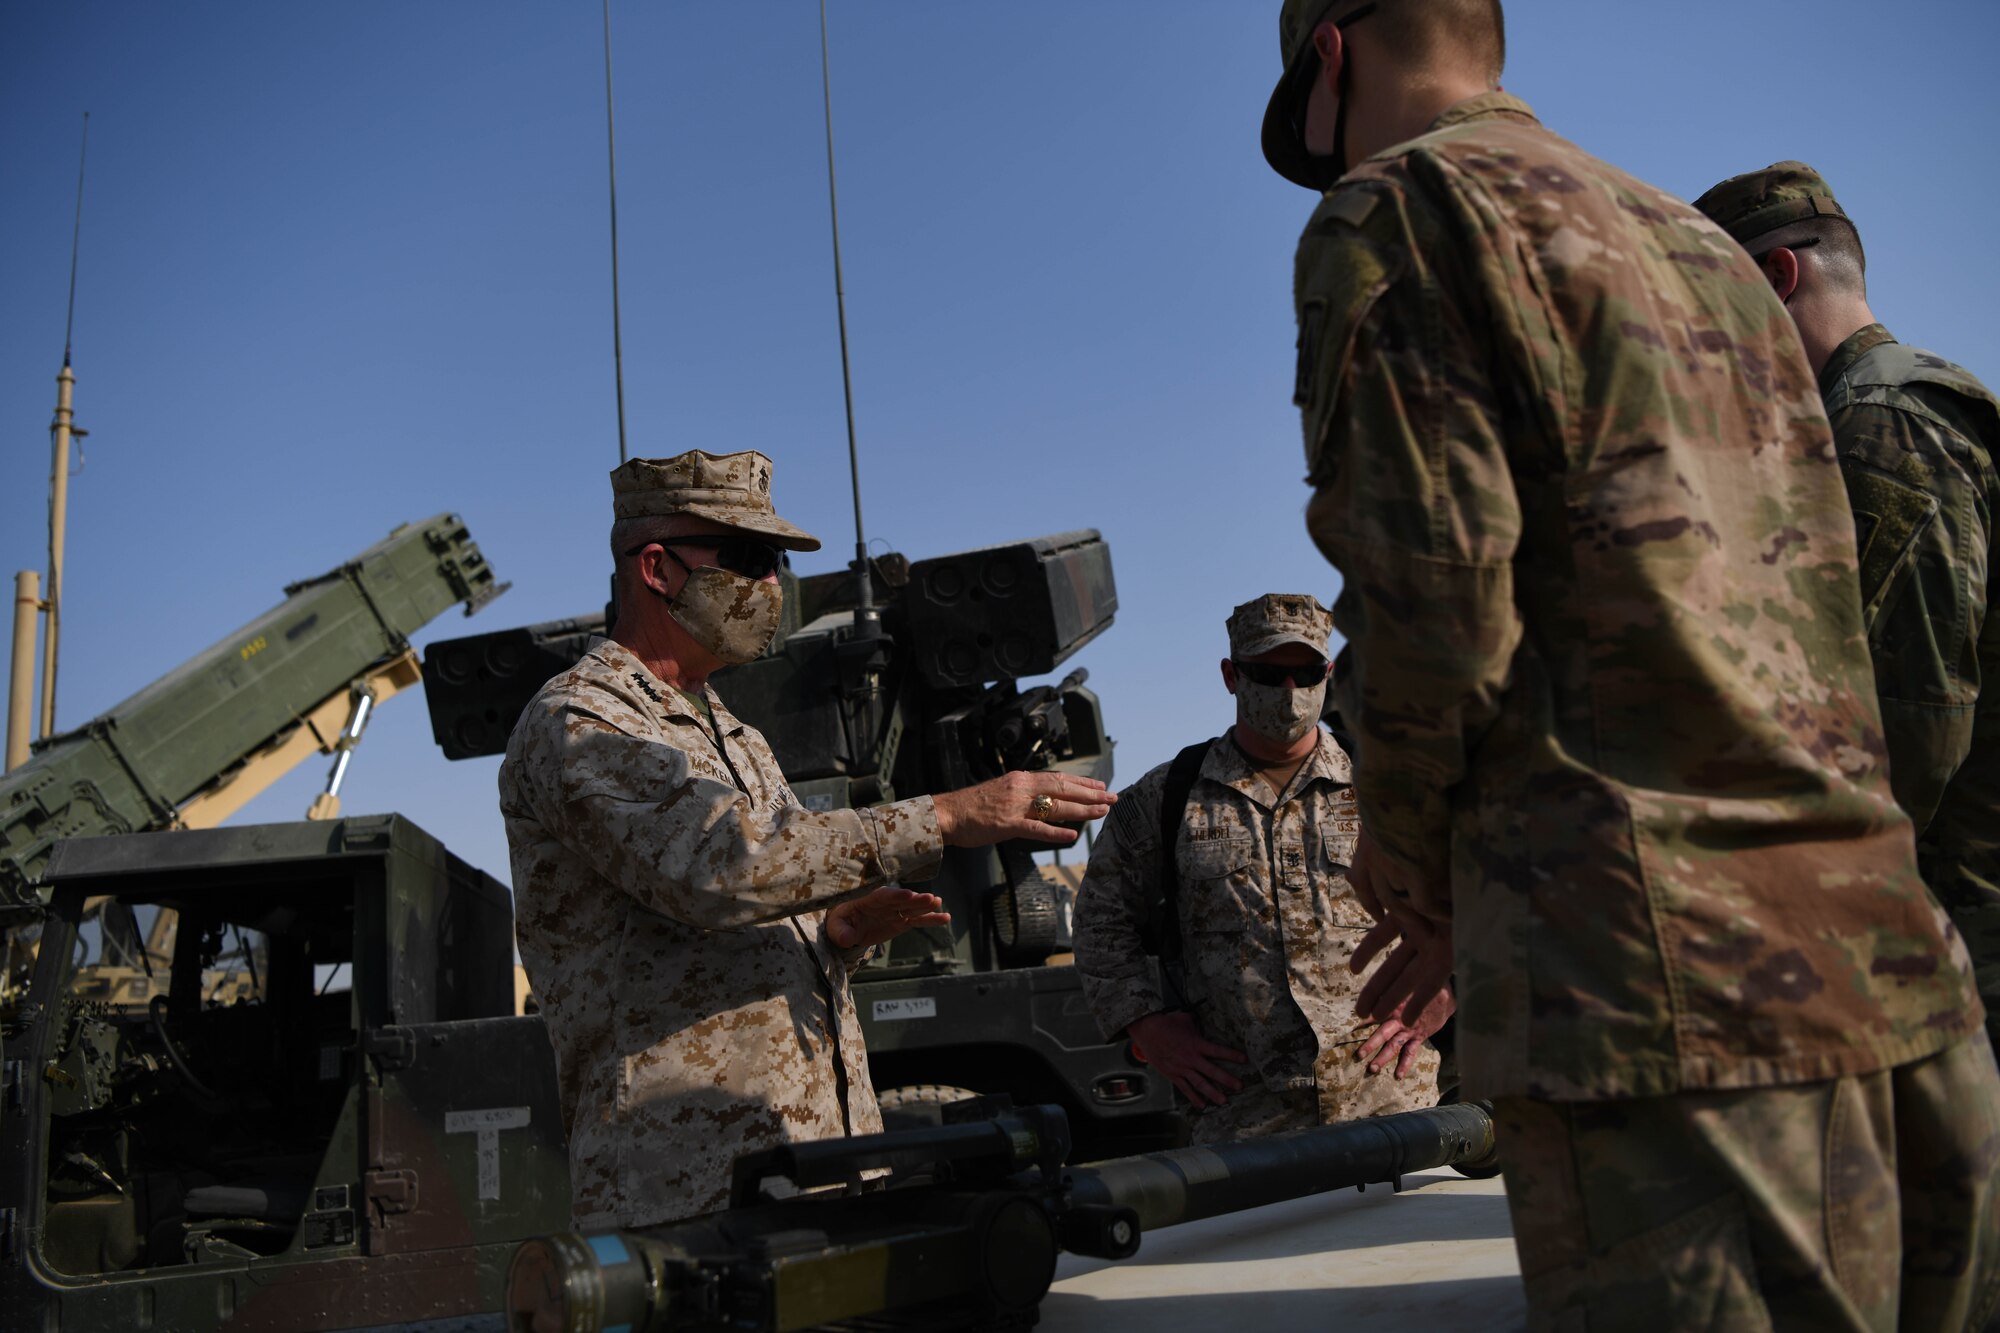 U.S. Marine Corps Gen. Kenneth F. McKenzie Jr., United States Central Command commander, talks about capabilities of the Avenger Air Defense System with Army Soldiers during a visit to the Alpha Battery 5-52 Air Defense Artillery Battalion, Sept. 13, 2020, at Al Dhafra Air Base, United Arab Emirates.